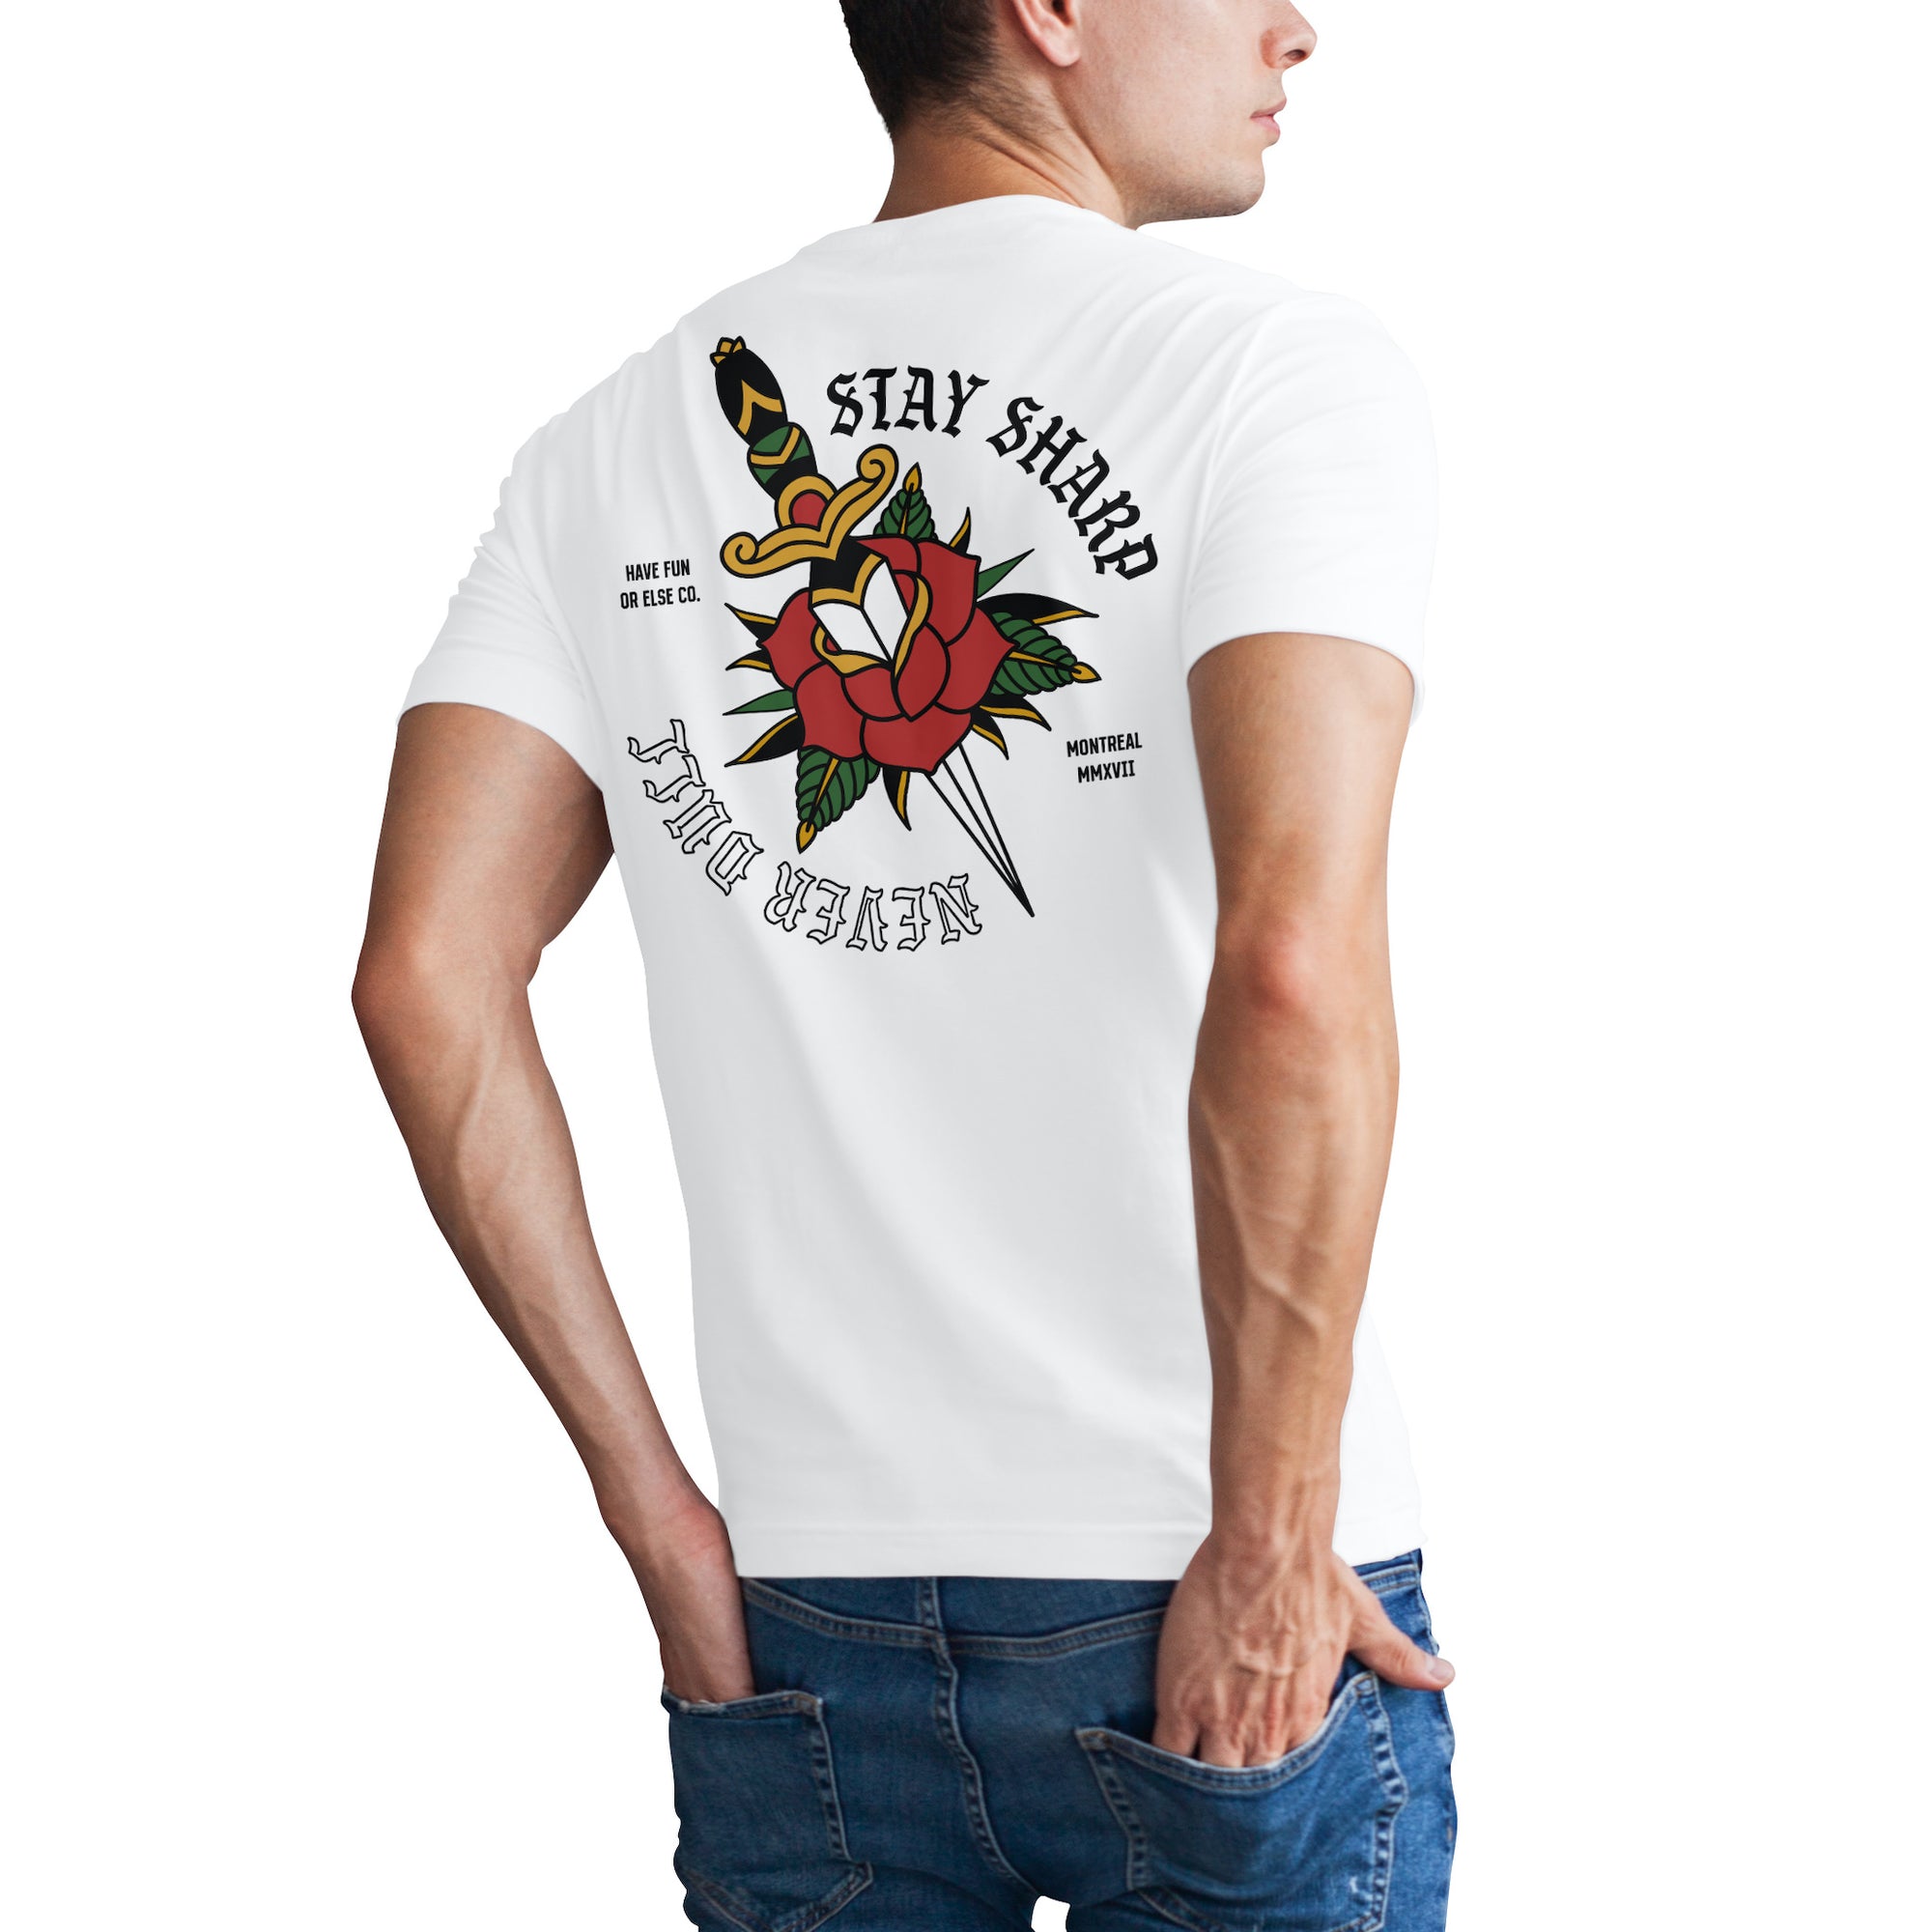 Man wearing Have Fun Or Else Stay Sharp white t-shirt, back